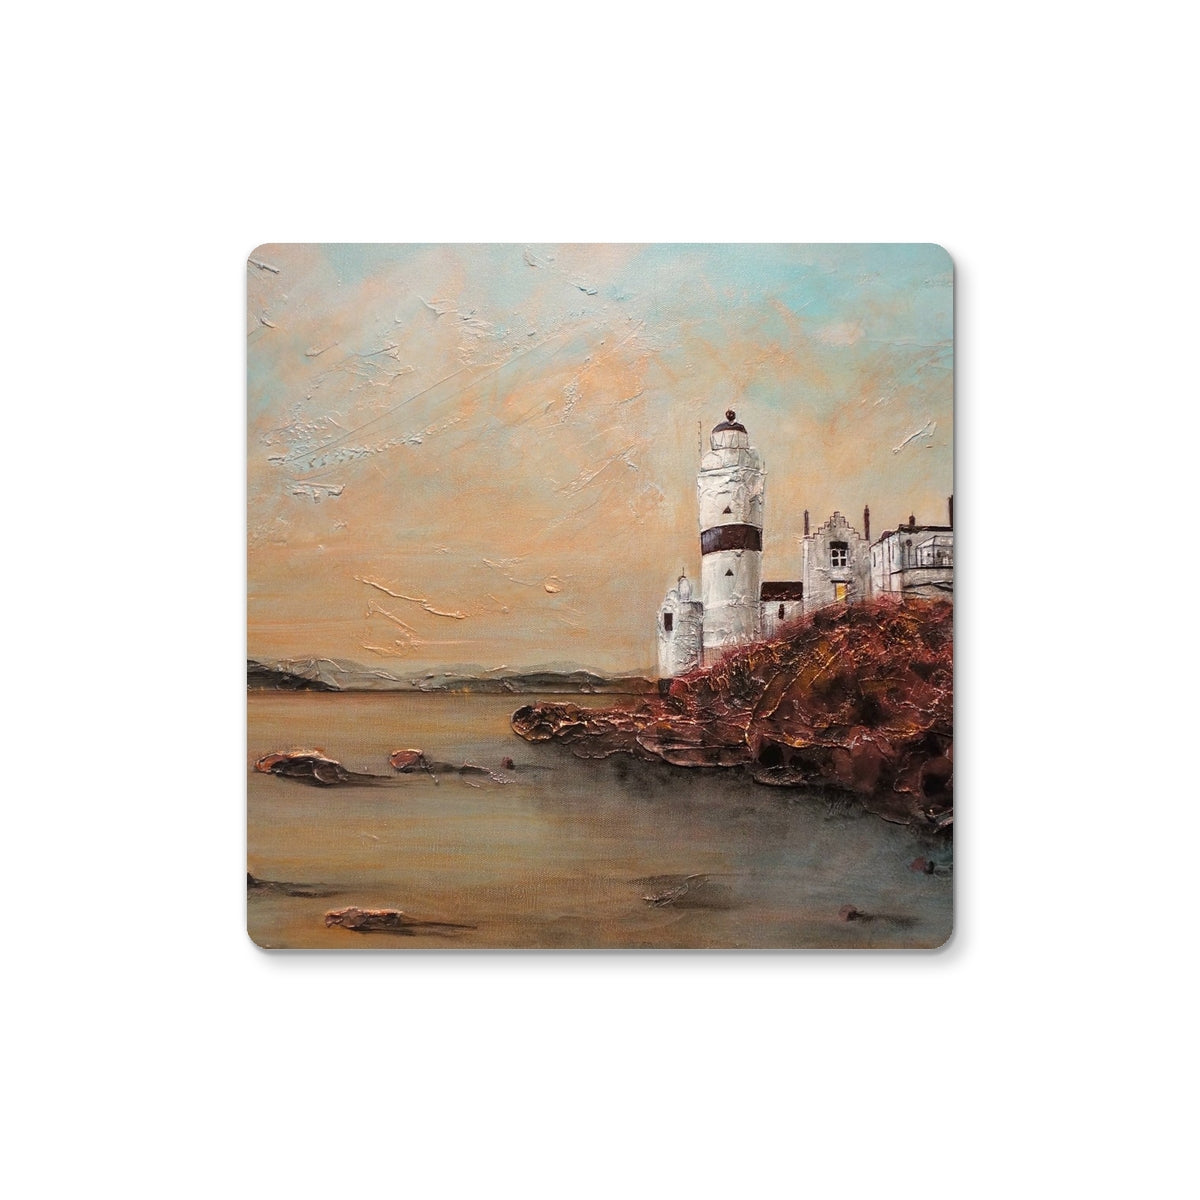 Cloch Lighthouse Dawn Art Gifts Coaster-Coasters-River Clyde Art Gallery-Single Coaster-Paintings, Prints, Homeware, Art Gifts From Scotland By Scottish Artist Kevin Hunter